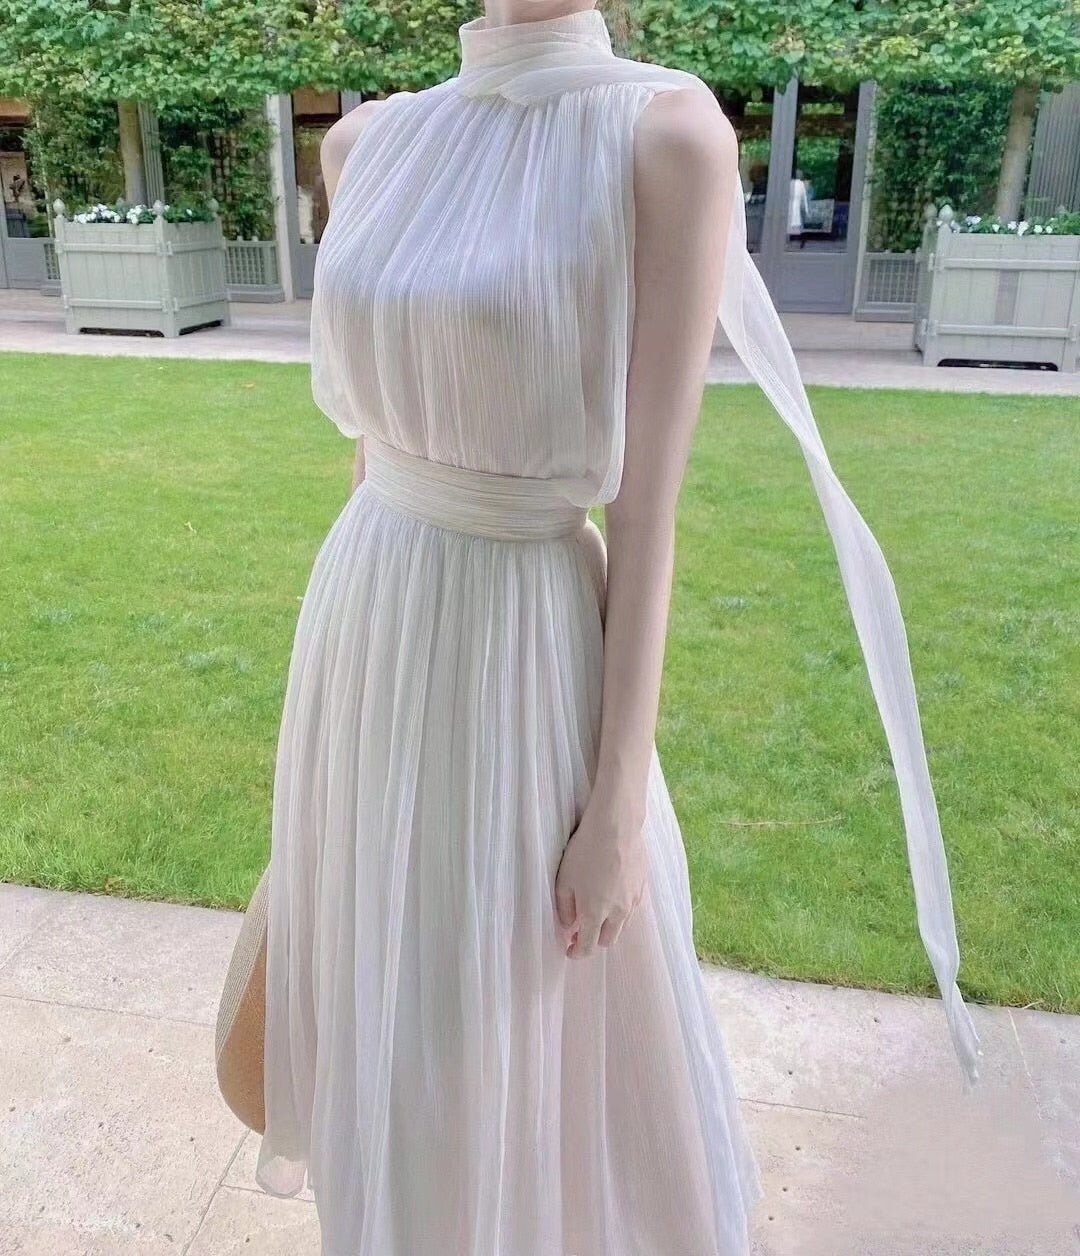 Geumxl White Elegance Dress Two Pieces Summer Sleeveless Bohemian Gown Vacation Style French Chi Chiffon Designer Evening Dresses Fairy